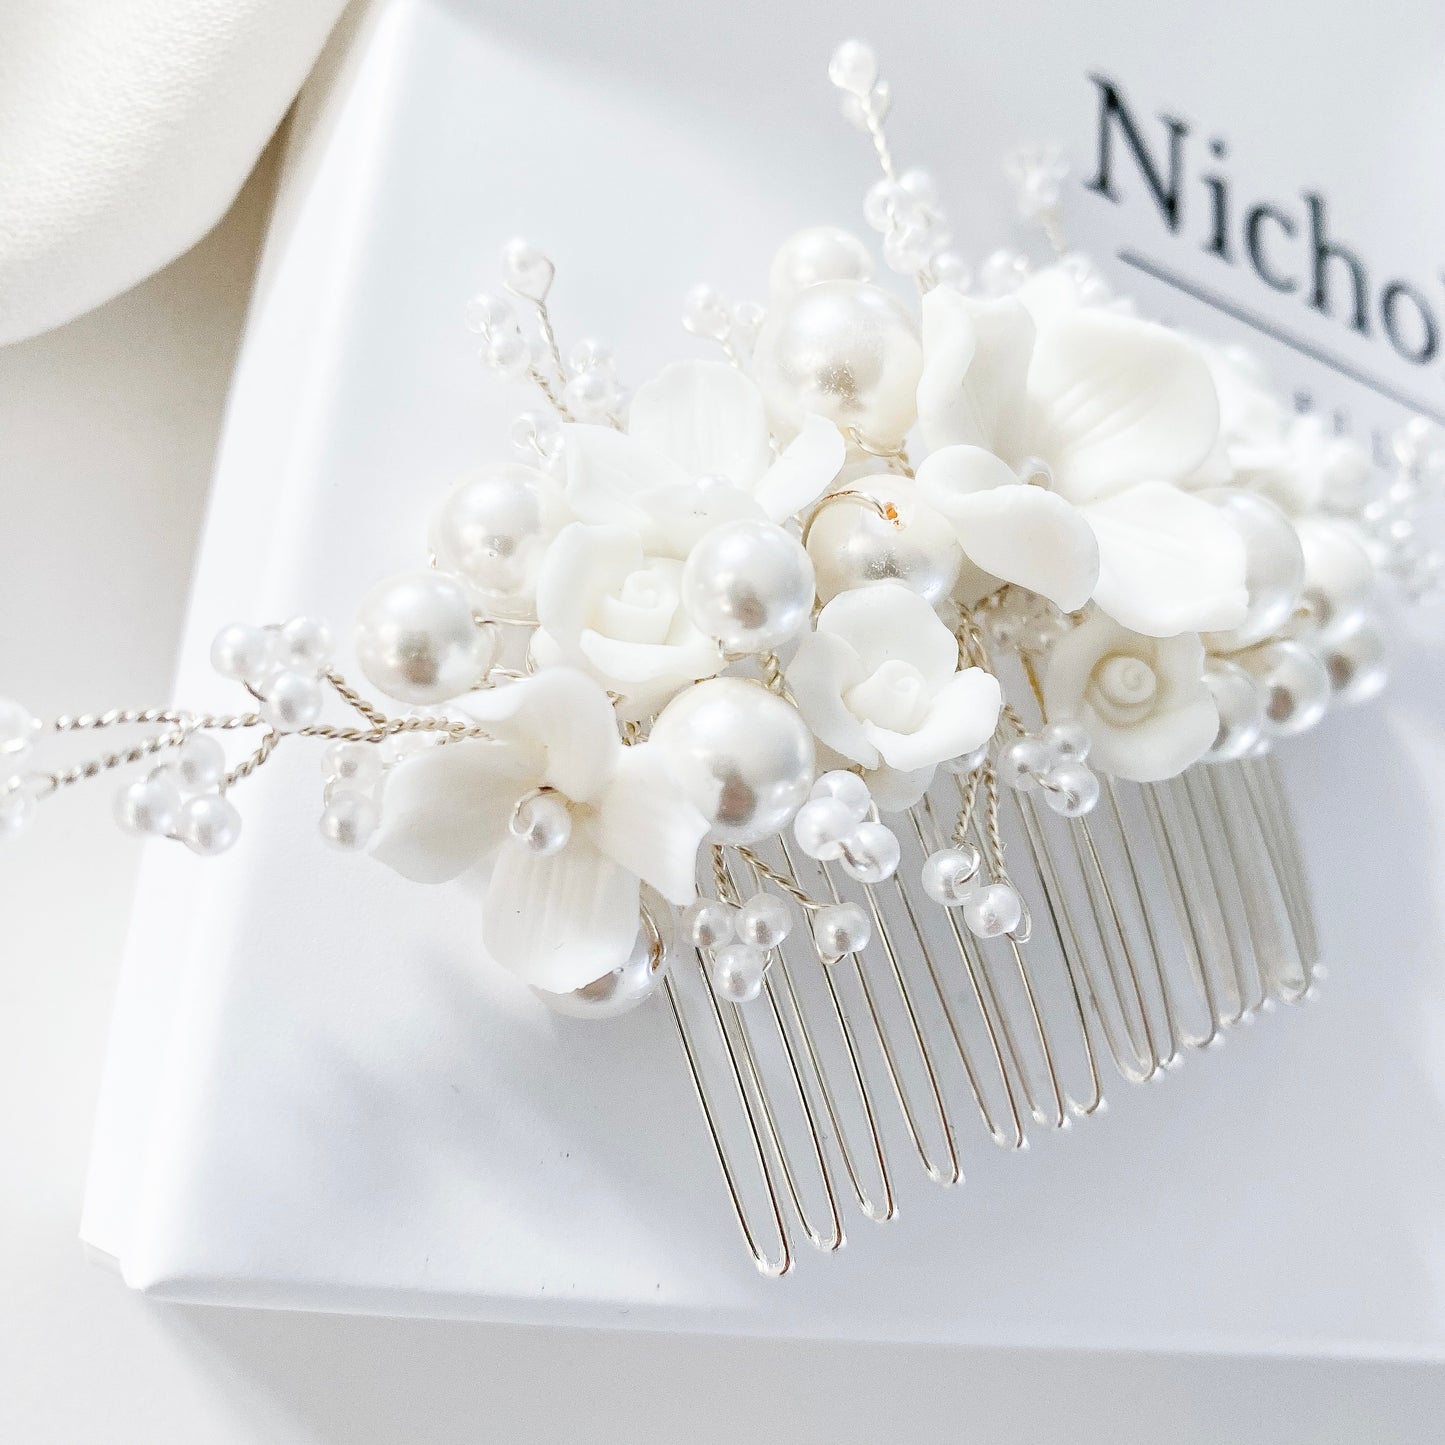 Porcelain Flower and Pearl Spray Earring and Comb Set